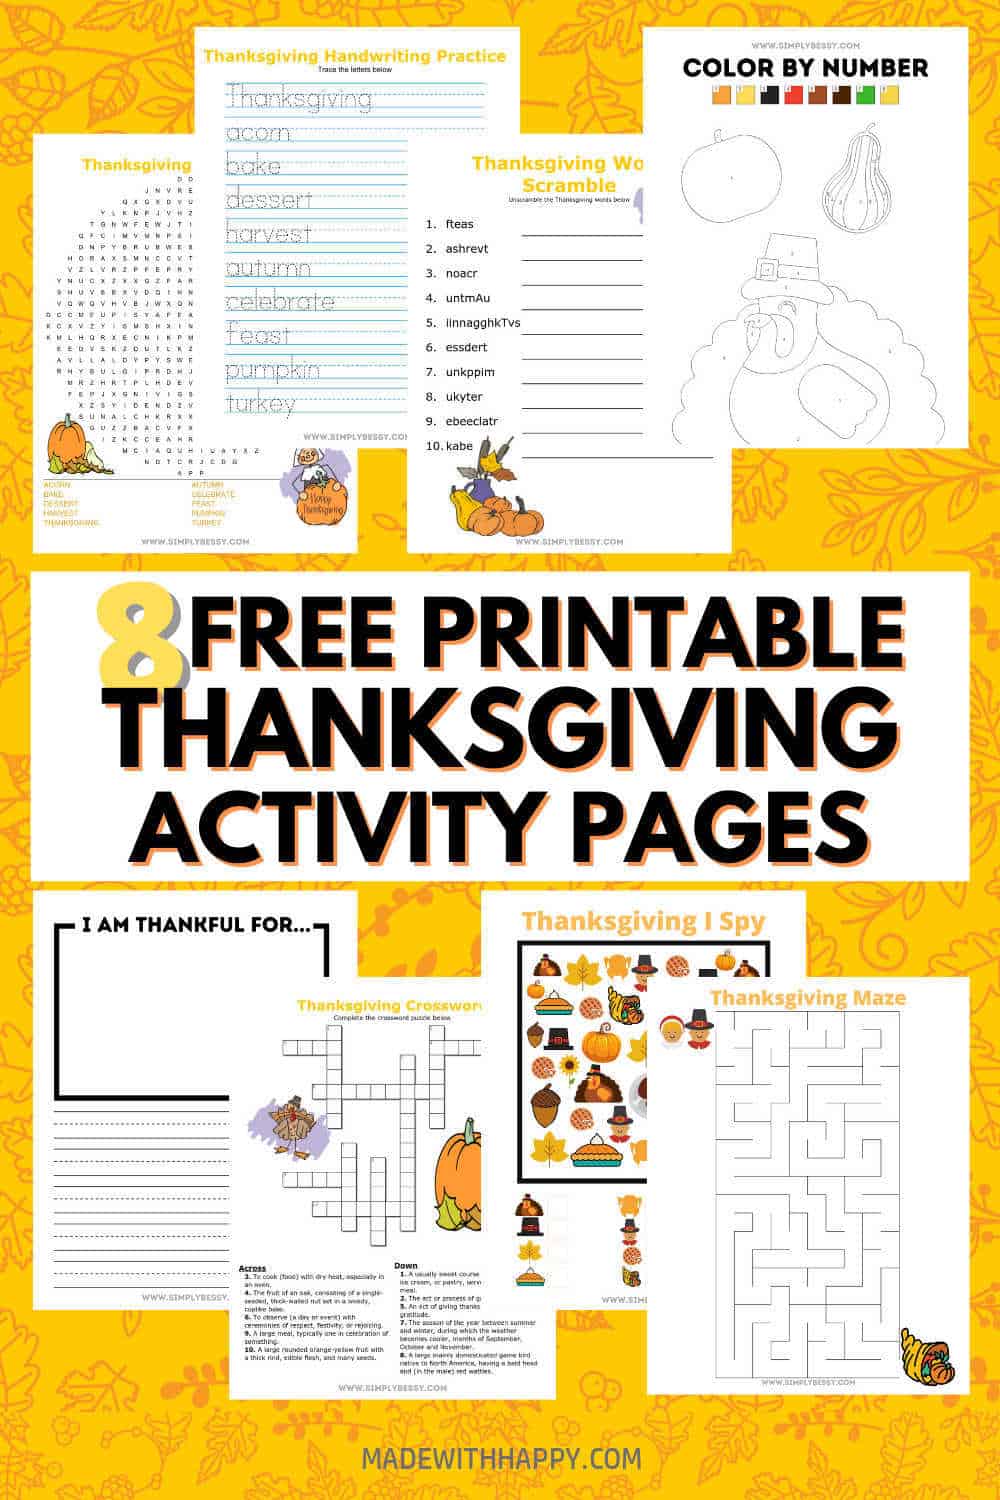 Thanksgiving Activity Pages